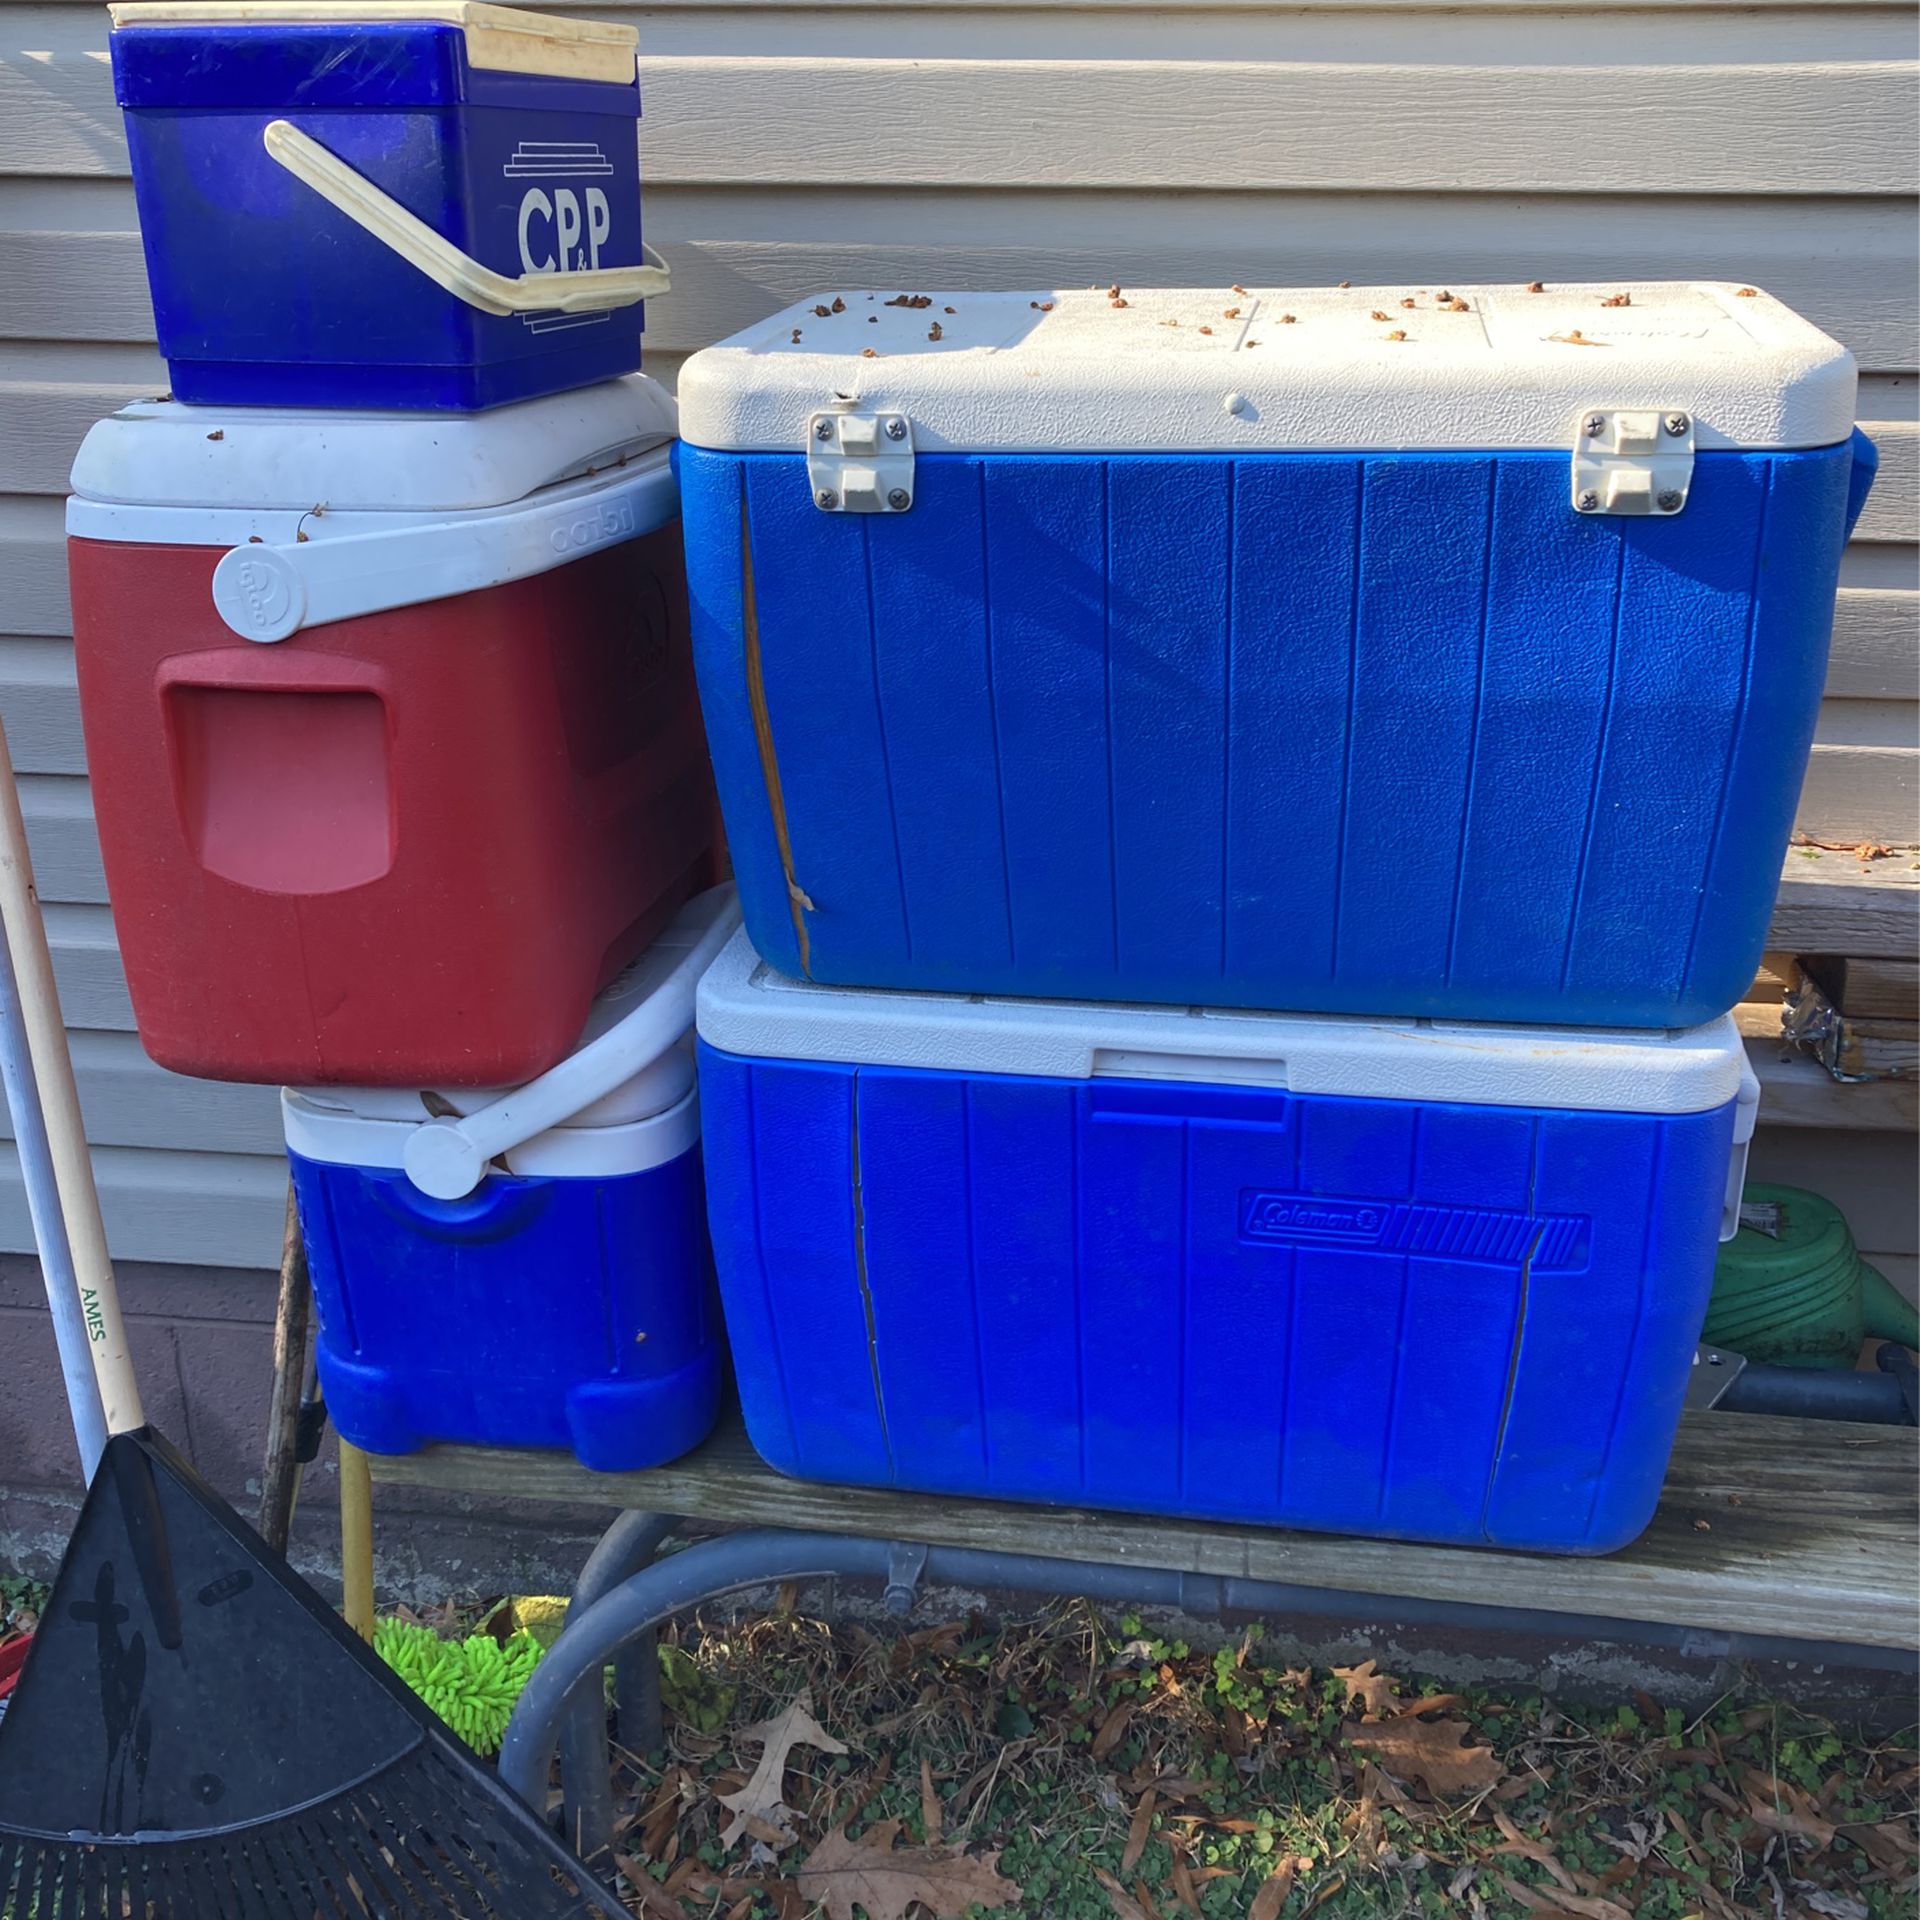 5 Coolers 10 Bucks For All Of Them